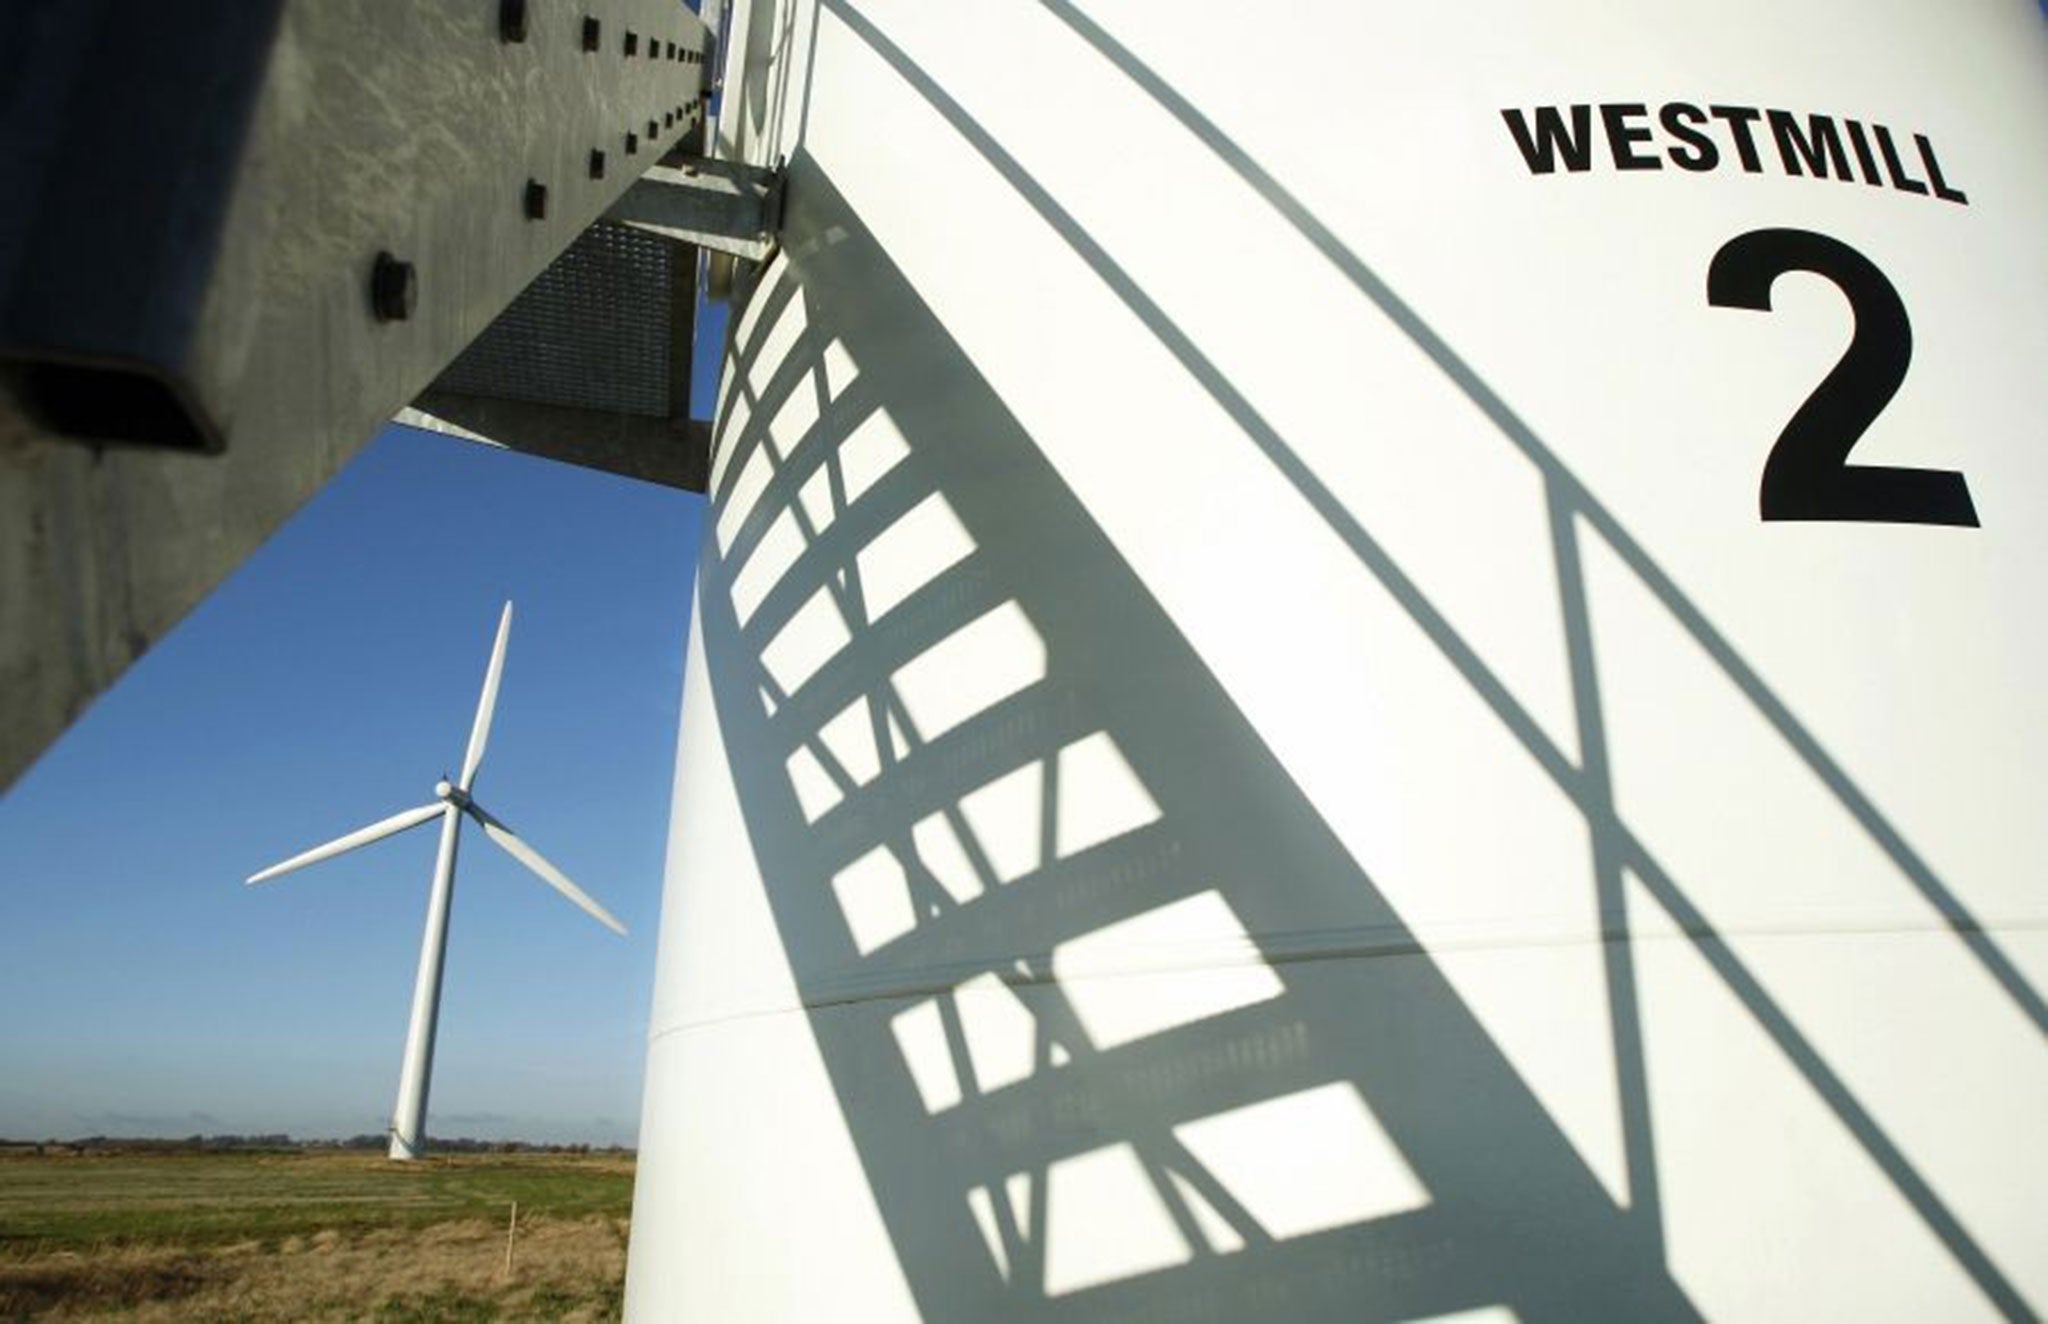 Households will be able to source their power from clean-energy projects such as the Westmill wind farm in Oxfordshire